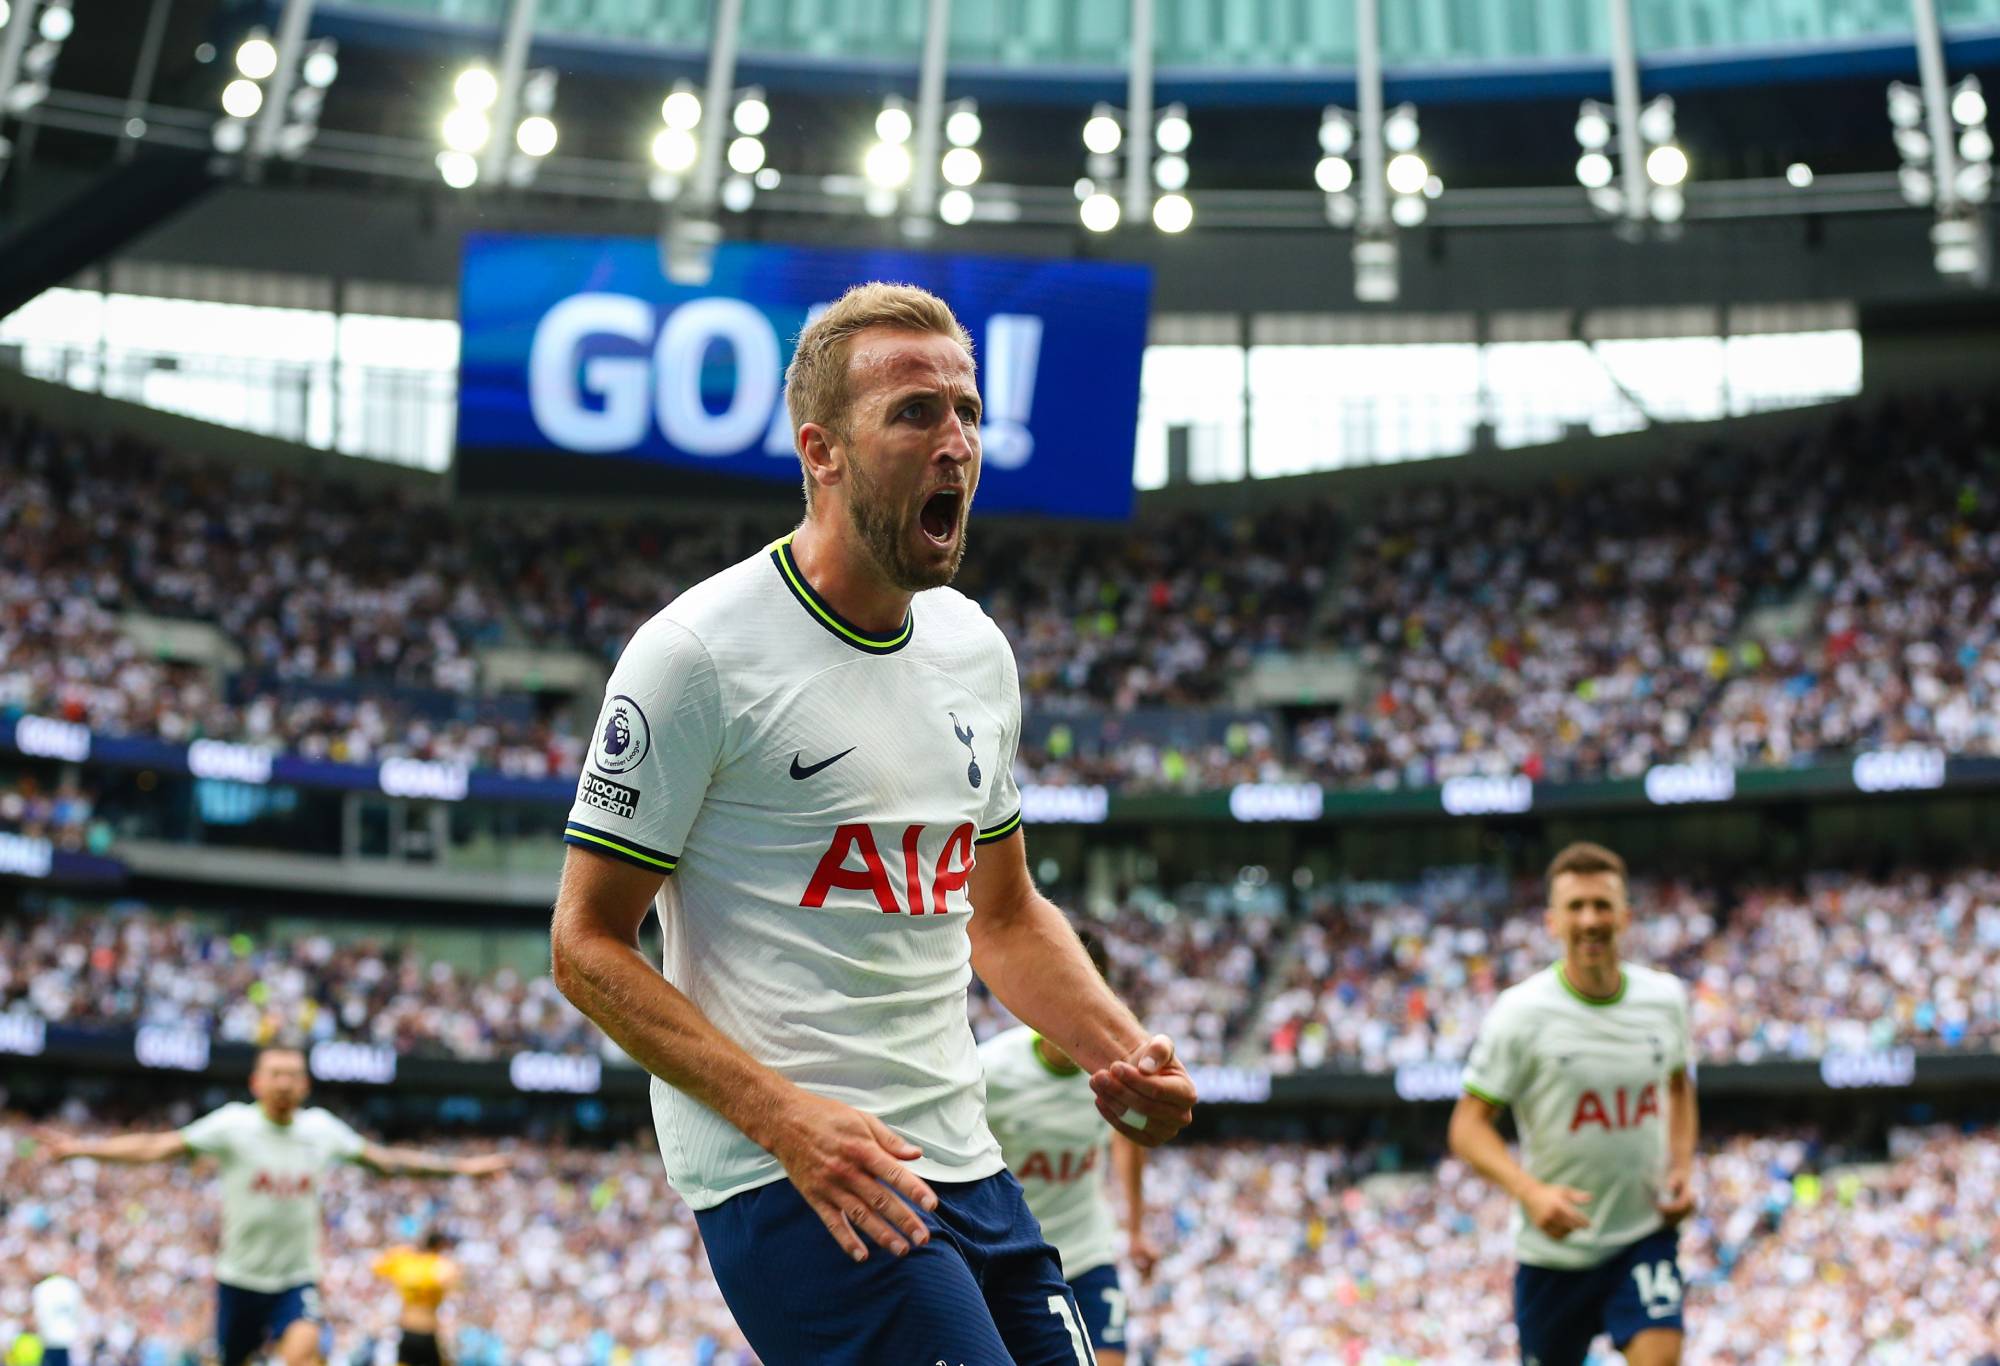 LONDON, ENGLAND - AUGUST 20: Harry Kane of Tottenham Hotspur celebrates scoring the opening goal during the Premier League match between Tottenham Hotspur and Wolverhampton Wanderers at Tottenham Hotspur Stadium on August 20, 2022 in London, United Kingdom. (Photo by Craig Mercer/MB Media/Getty Images)